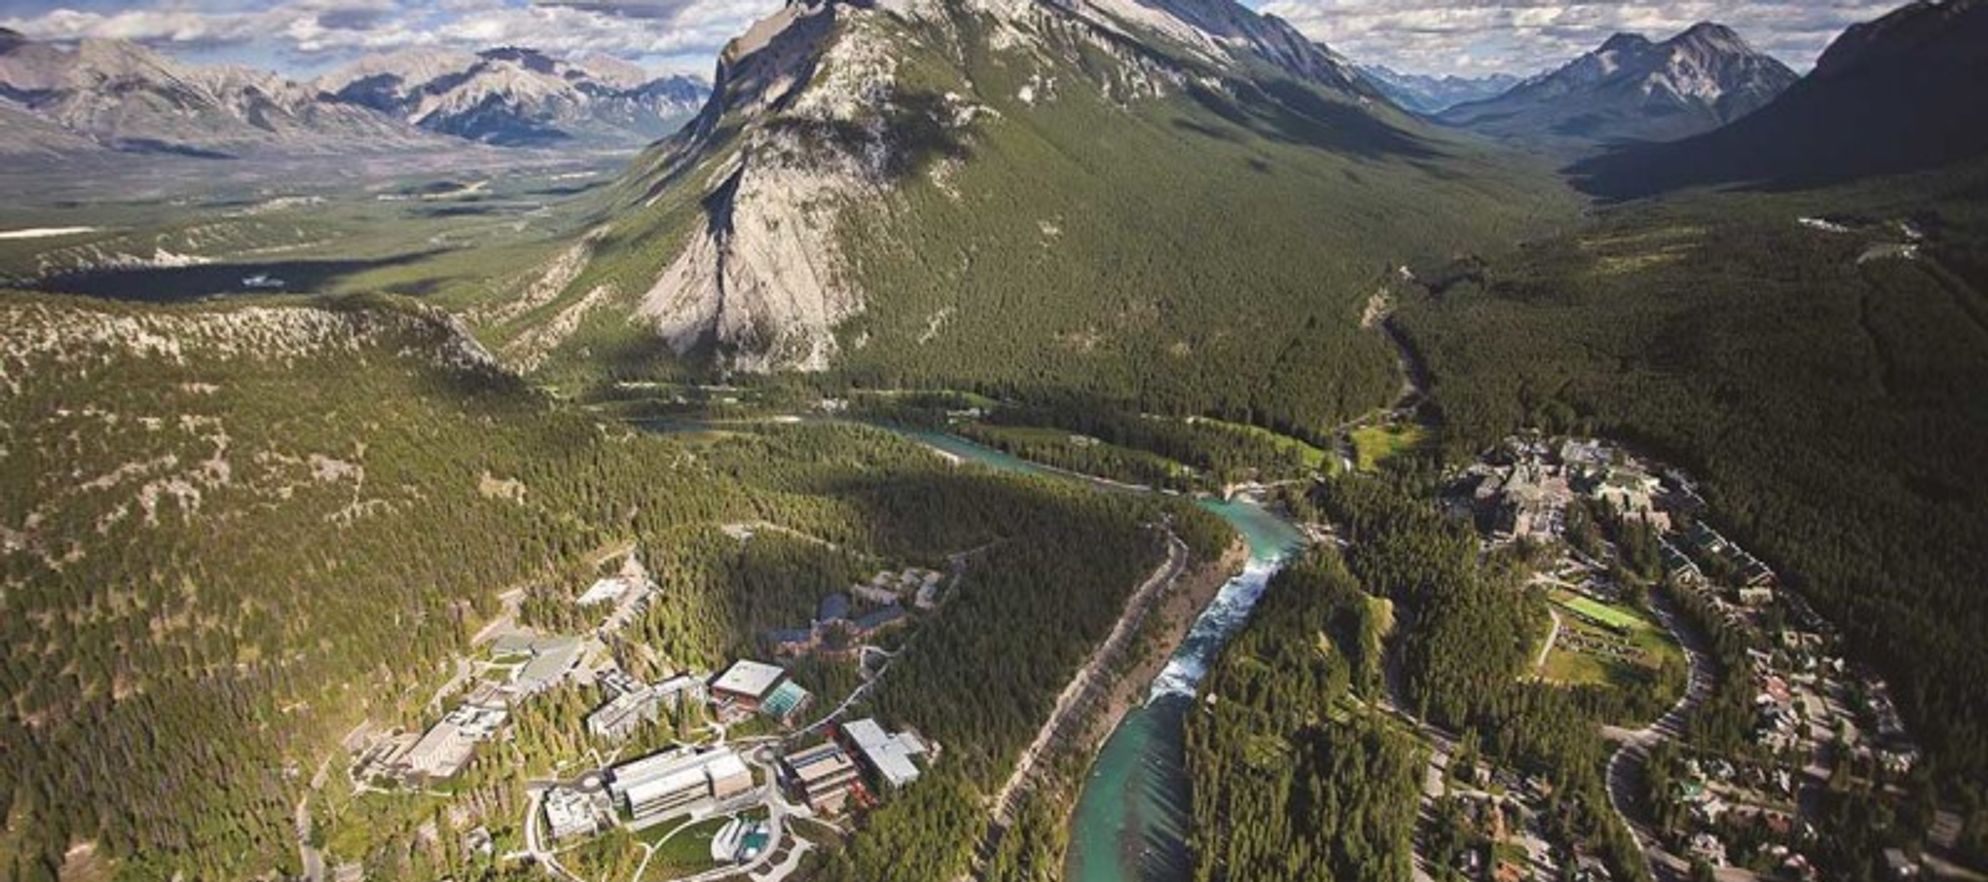 Banff Centre For Arts And Creativity